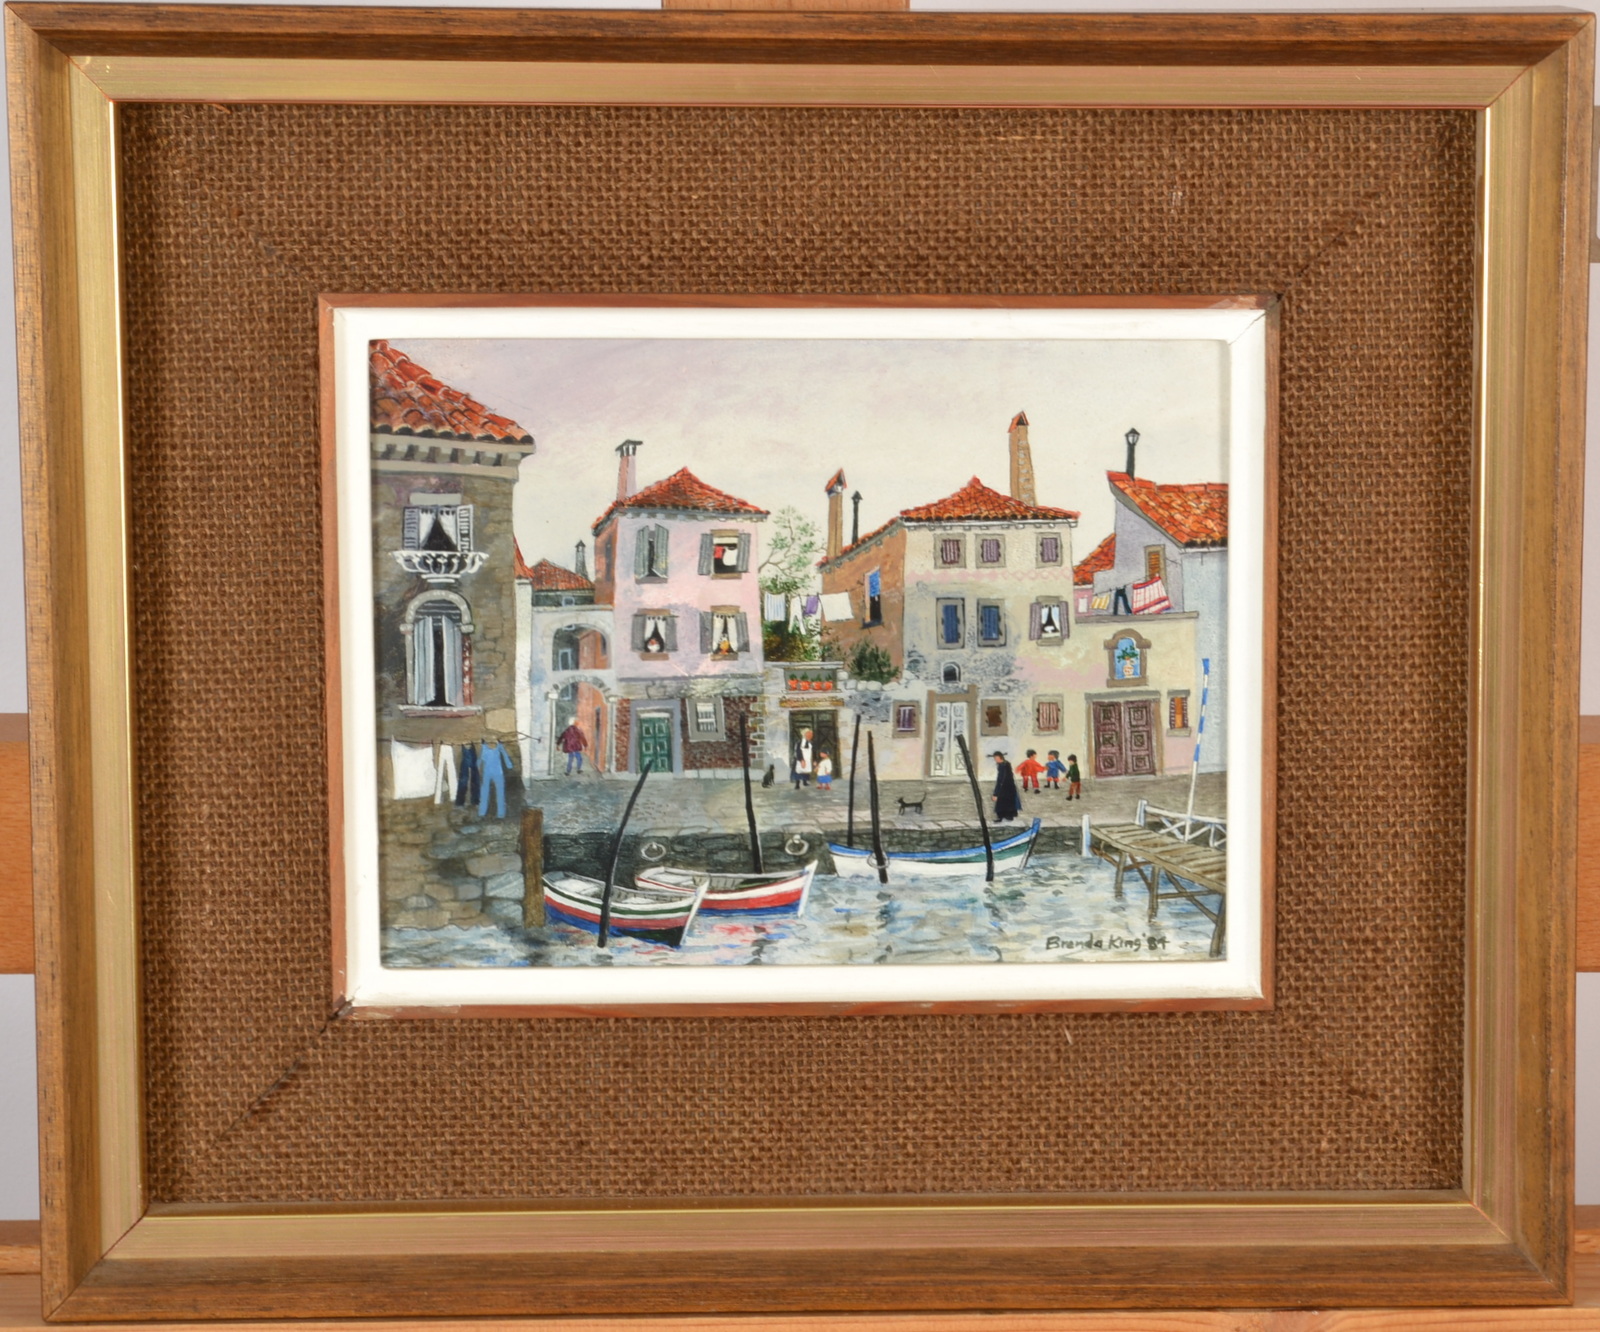 BRENDA KING Seca Marina, Venice Oil on board Signed and dated '84 Inscribed to the back 15 x 20. - Image 2 of 2